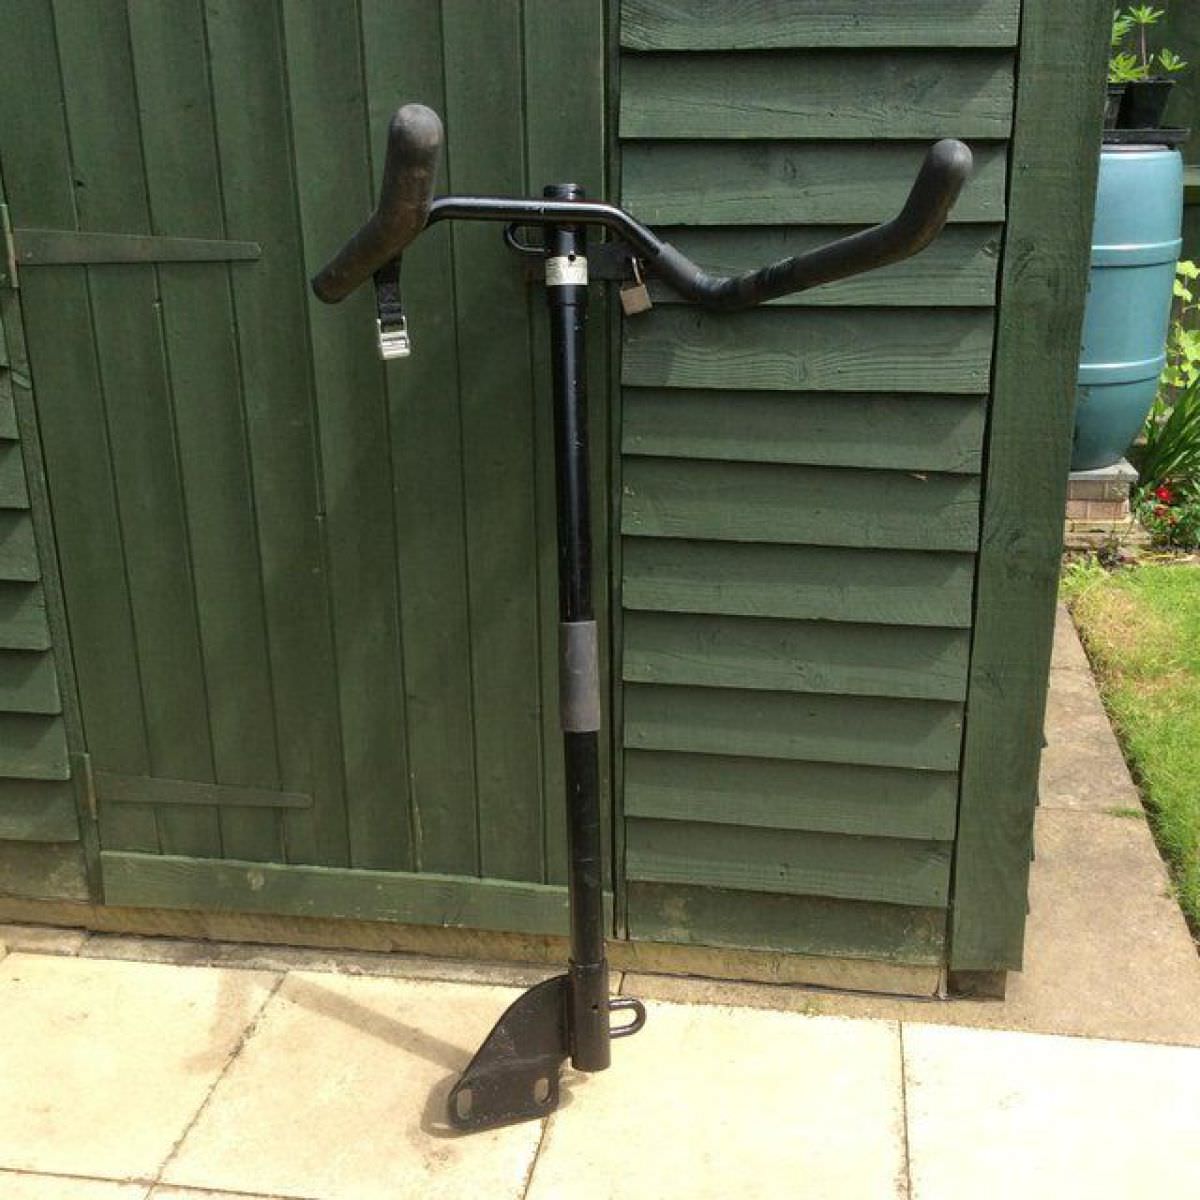 Witter ZX88 cycle carrier